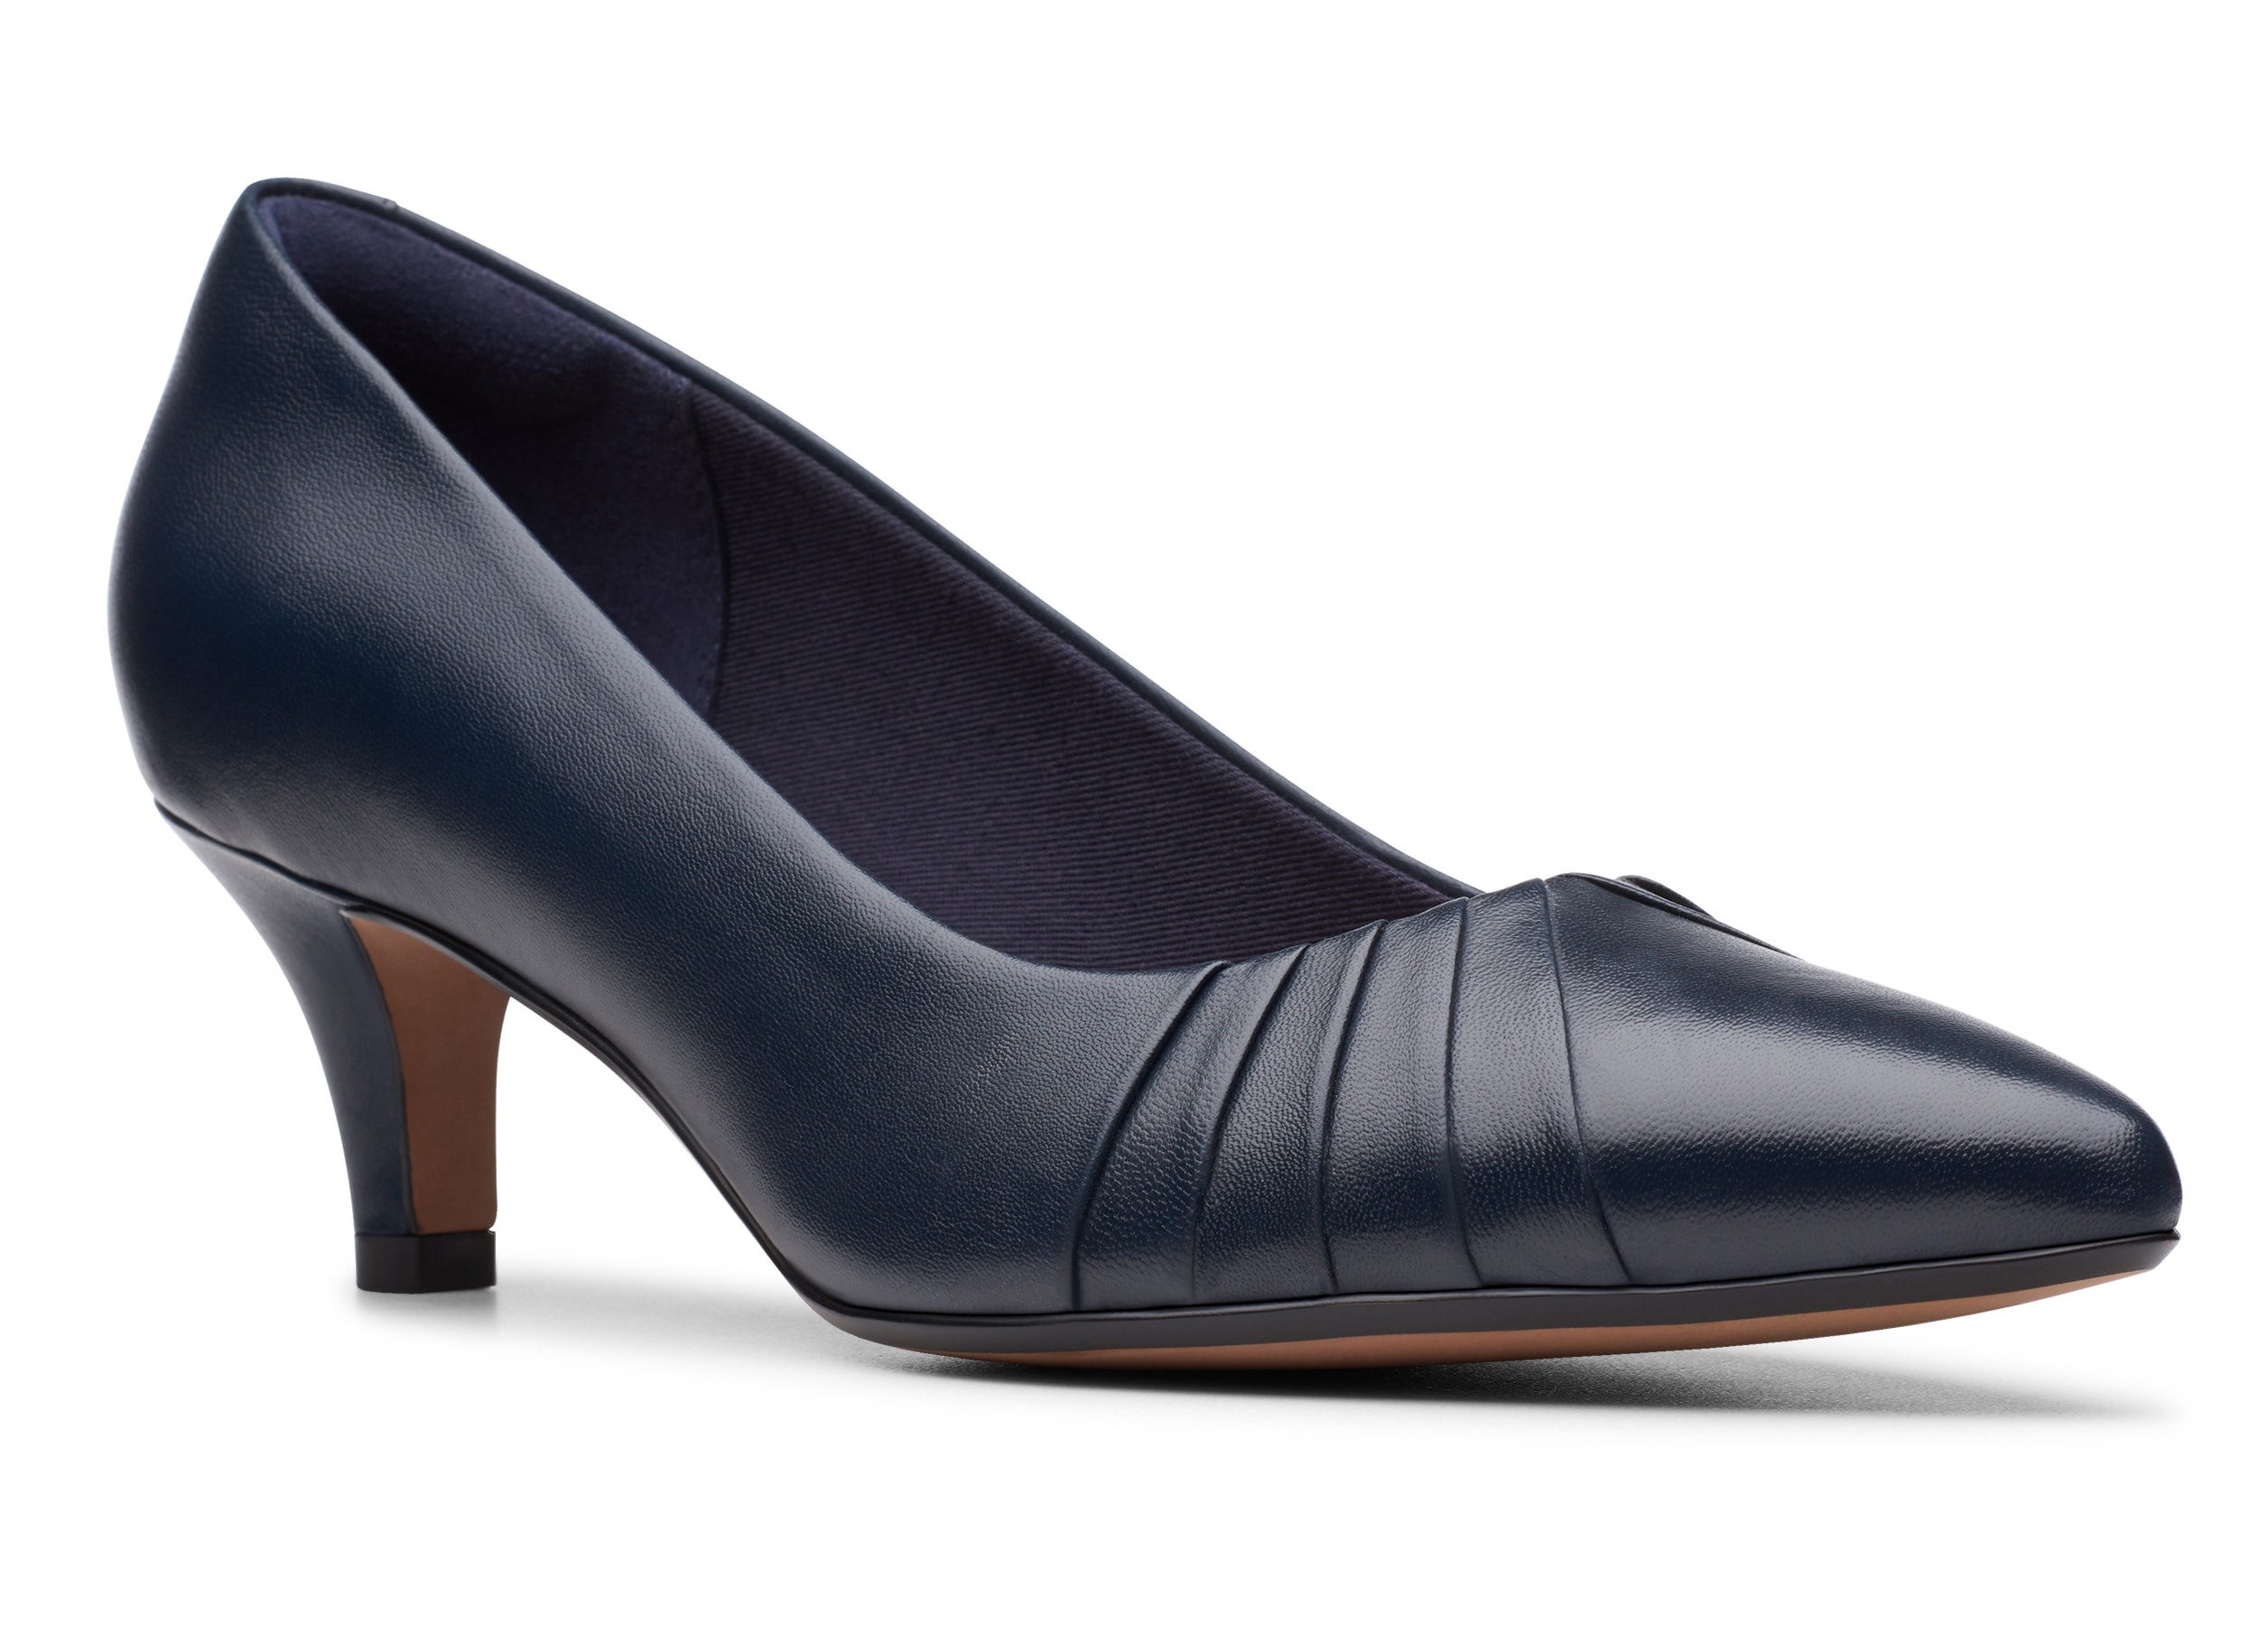 clarks dress shoes for ladies